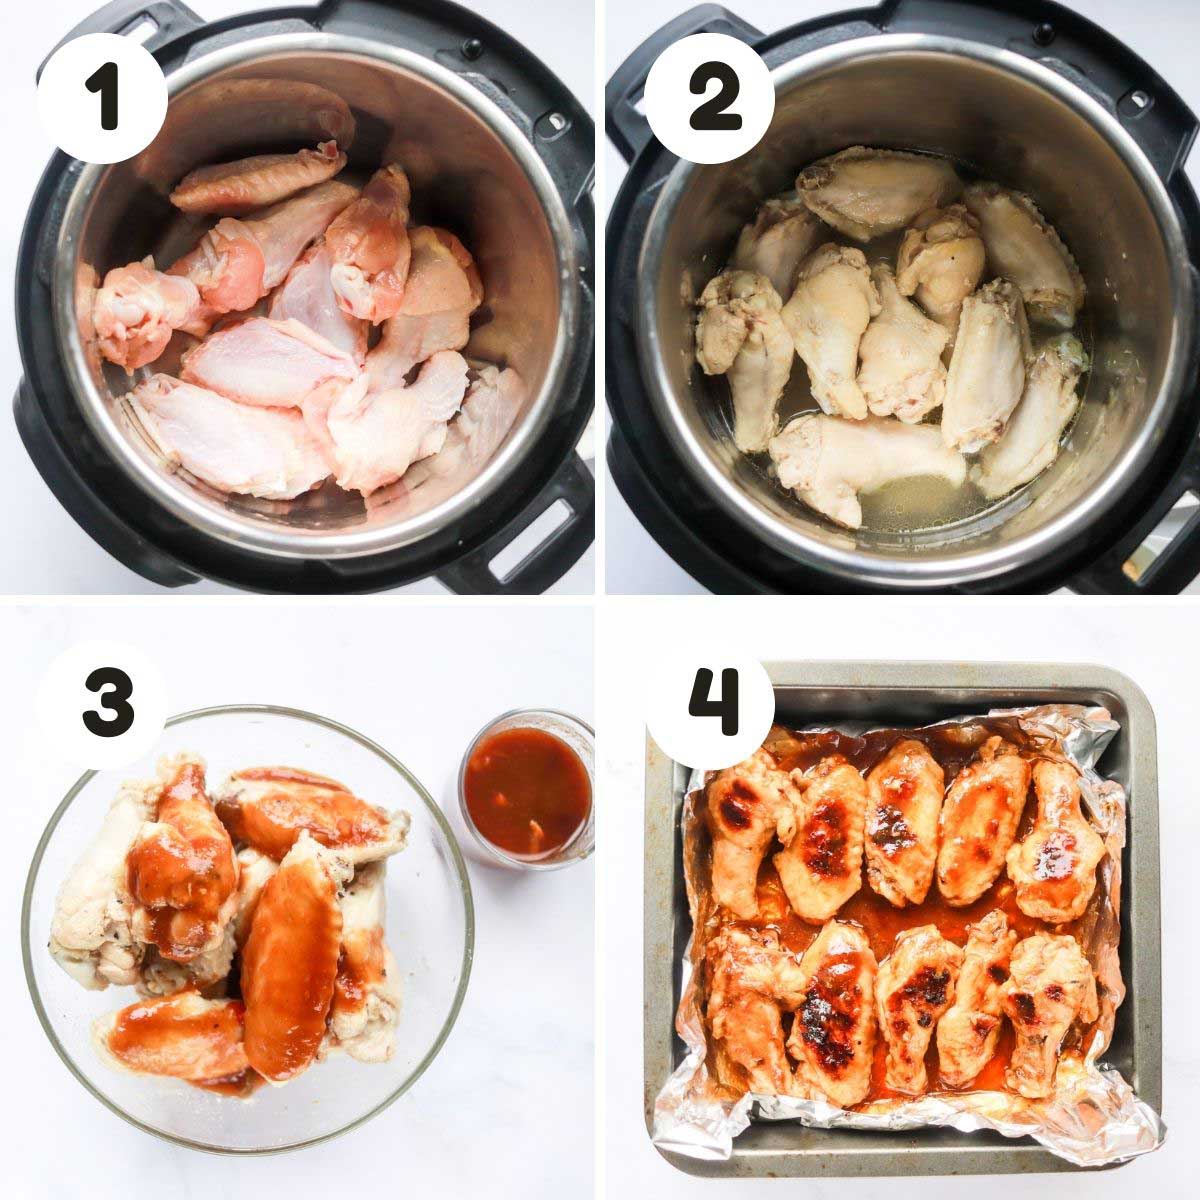 Steps to make the chicken wings.